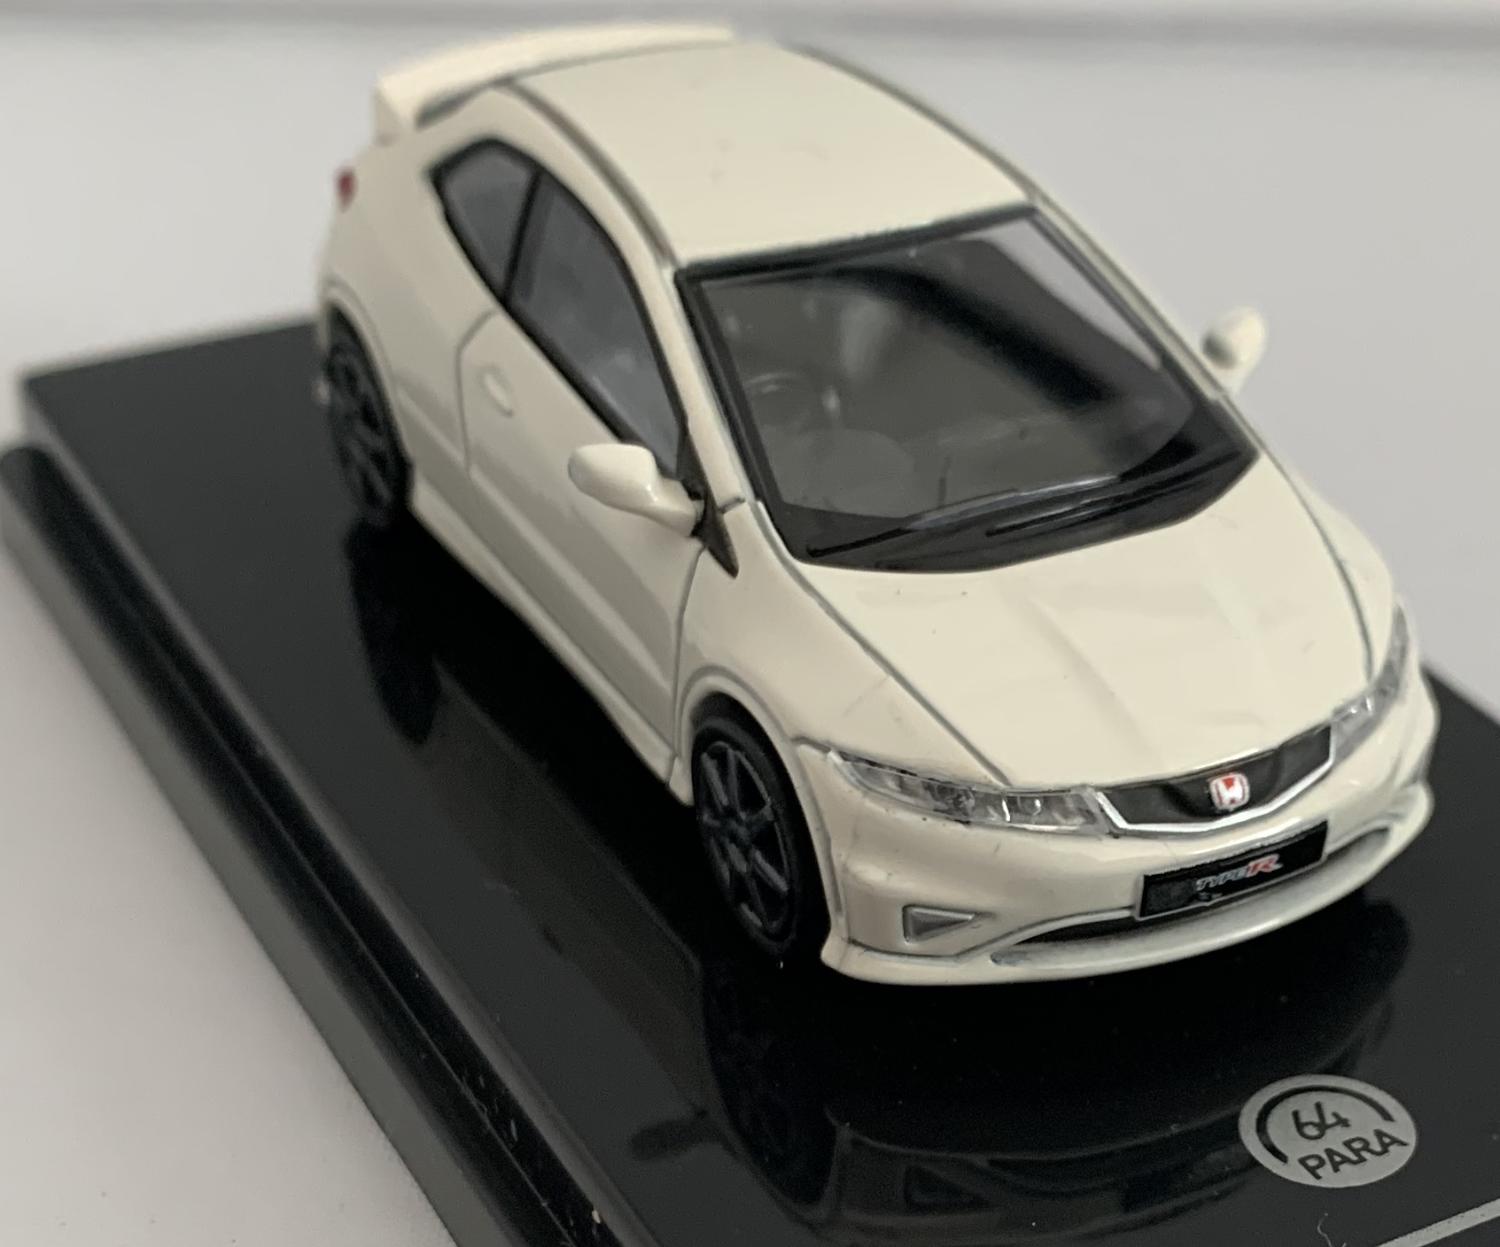 An excellent scale model of a Honda Civic Type R decorated in championship white with dark grey wheels and spoiler